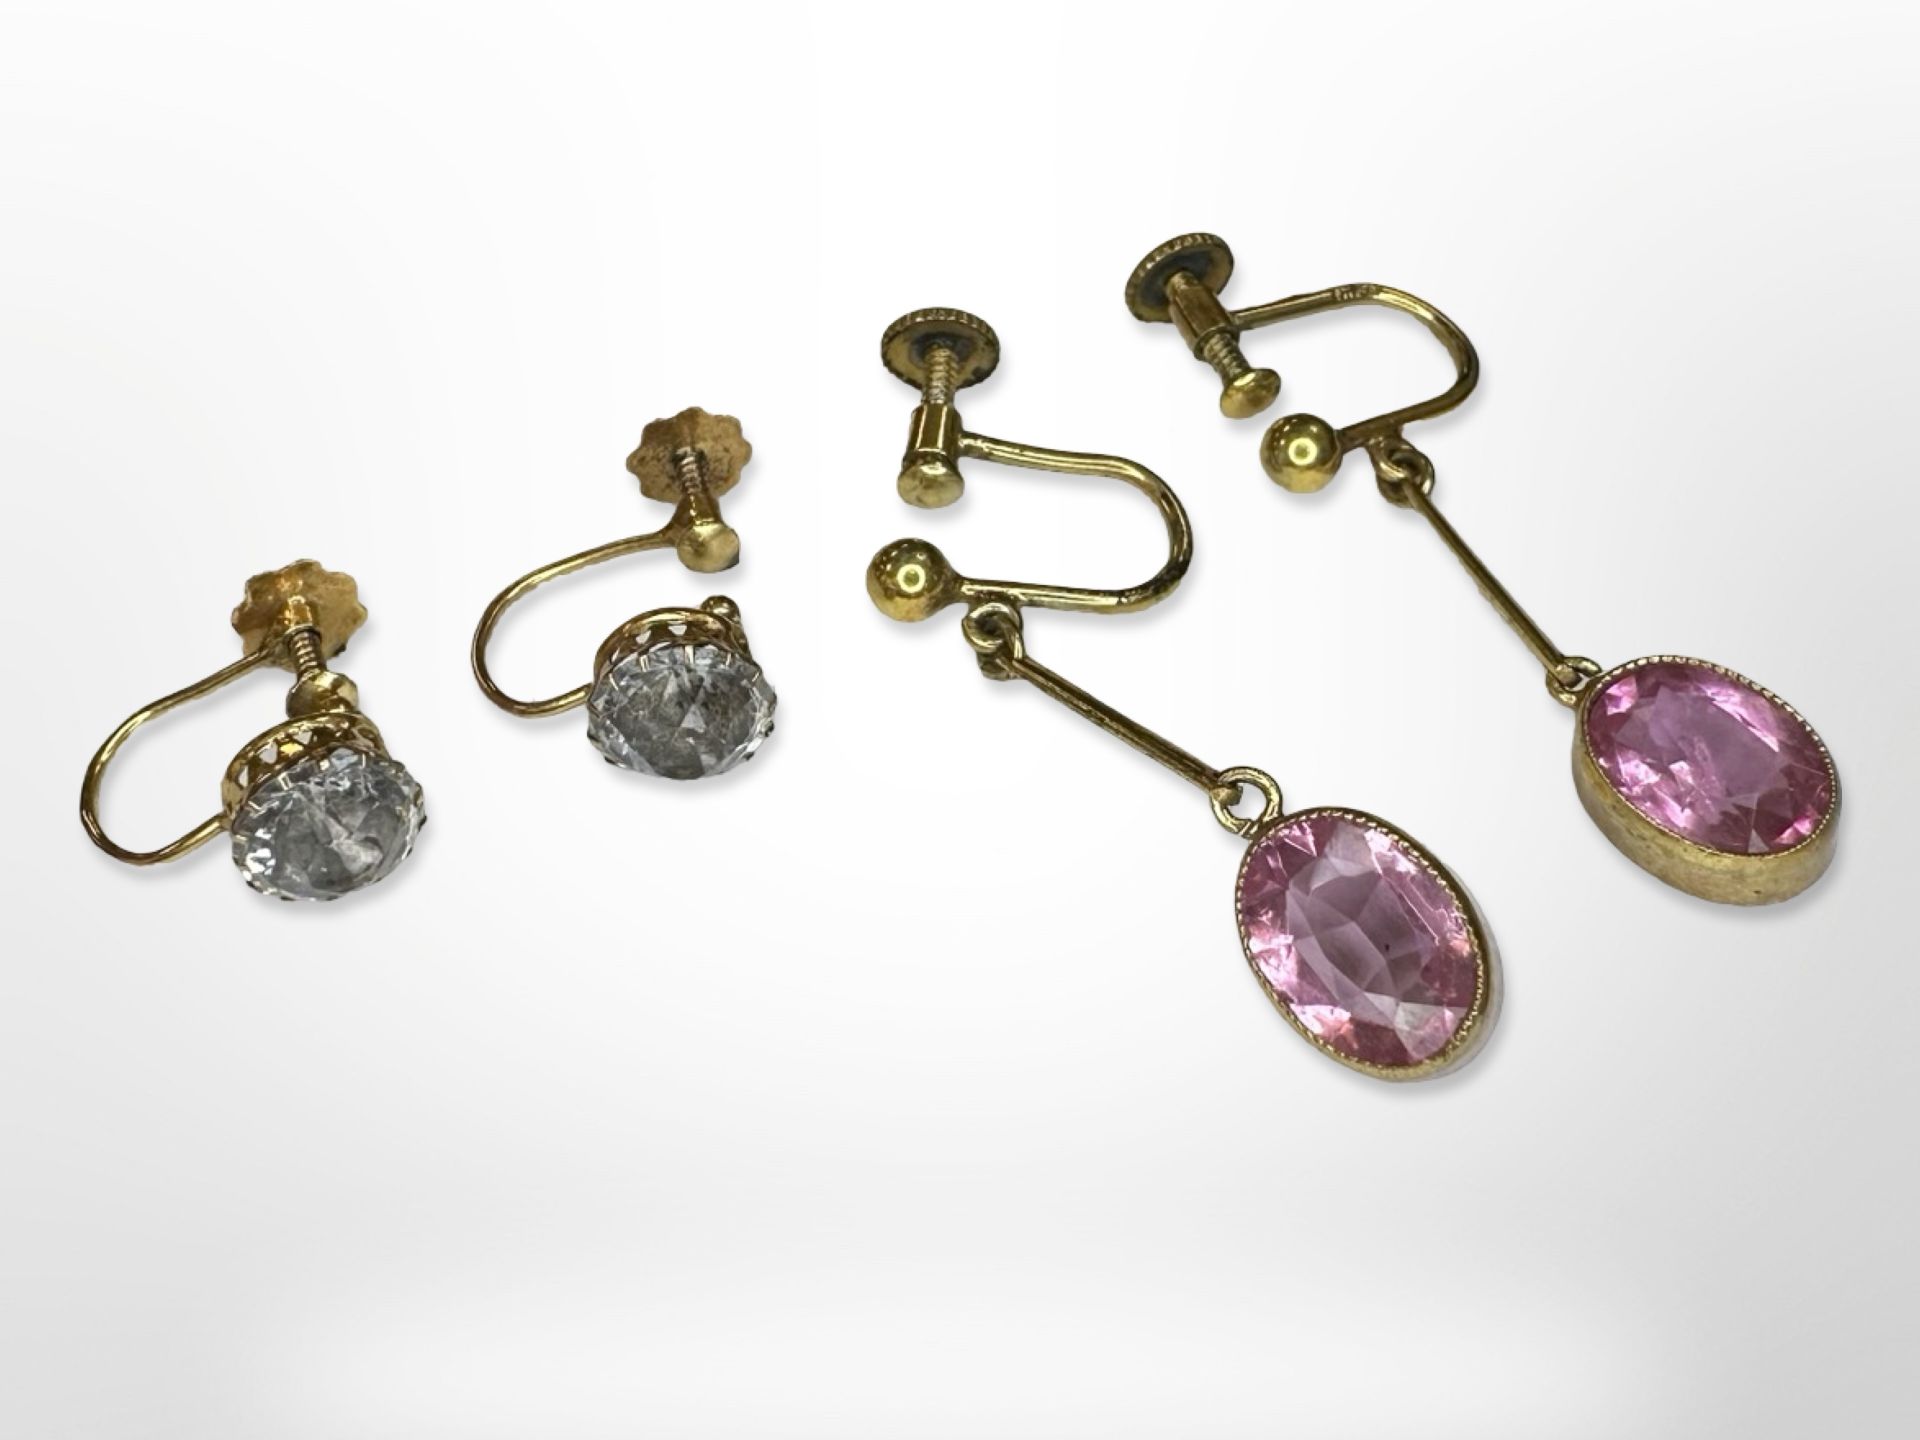 Two pairs of yellow metal earrings set with semi-precious stones.